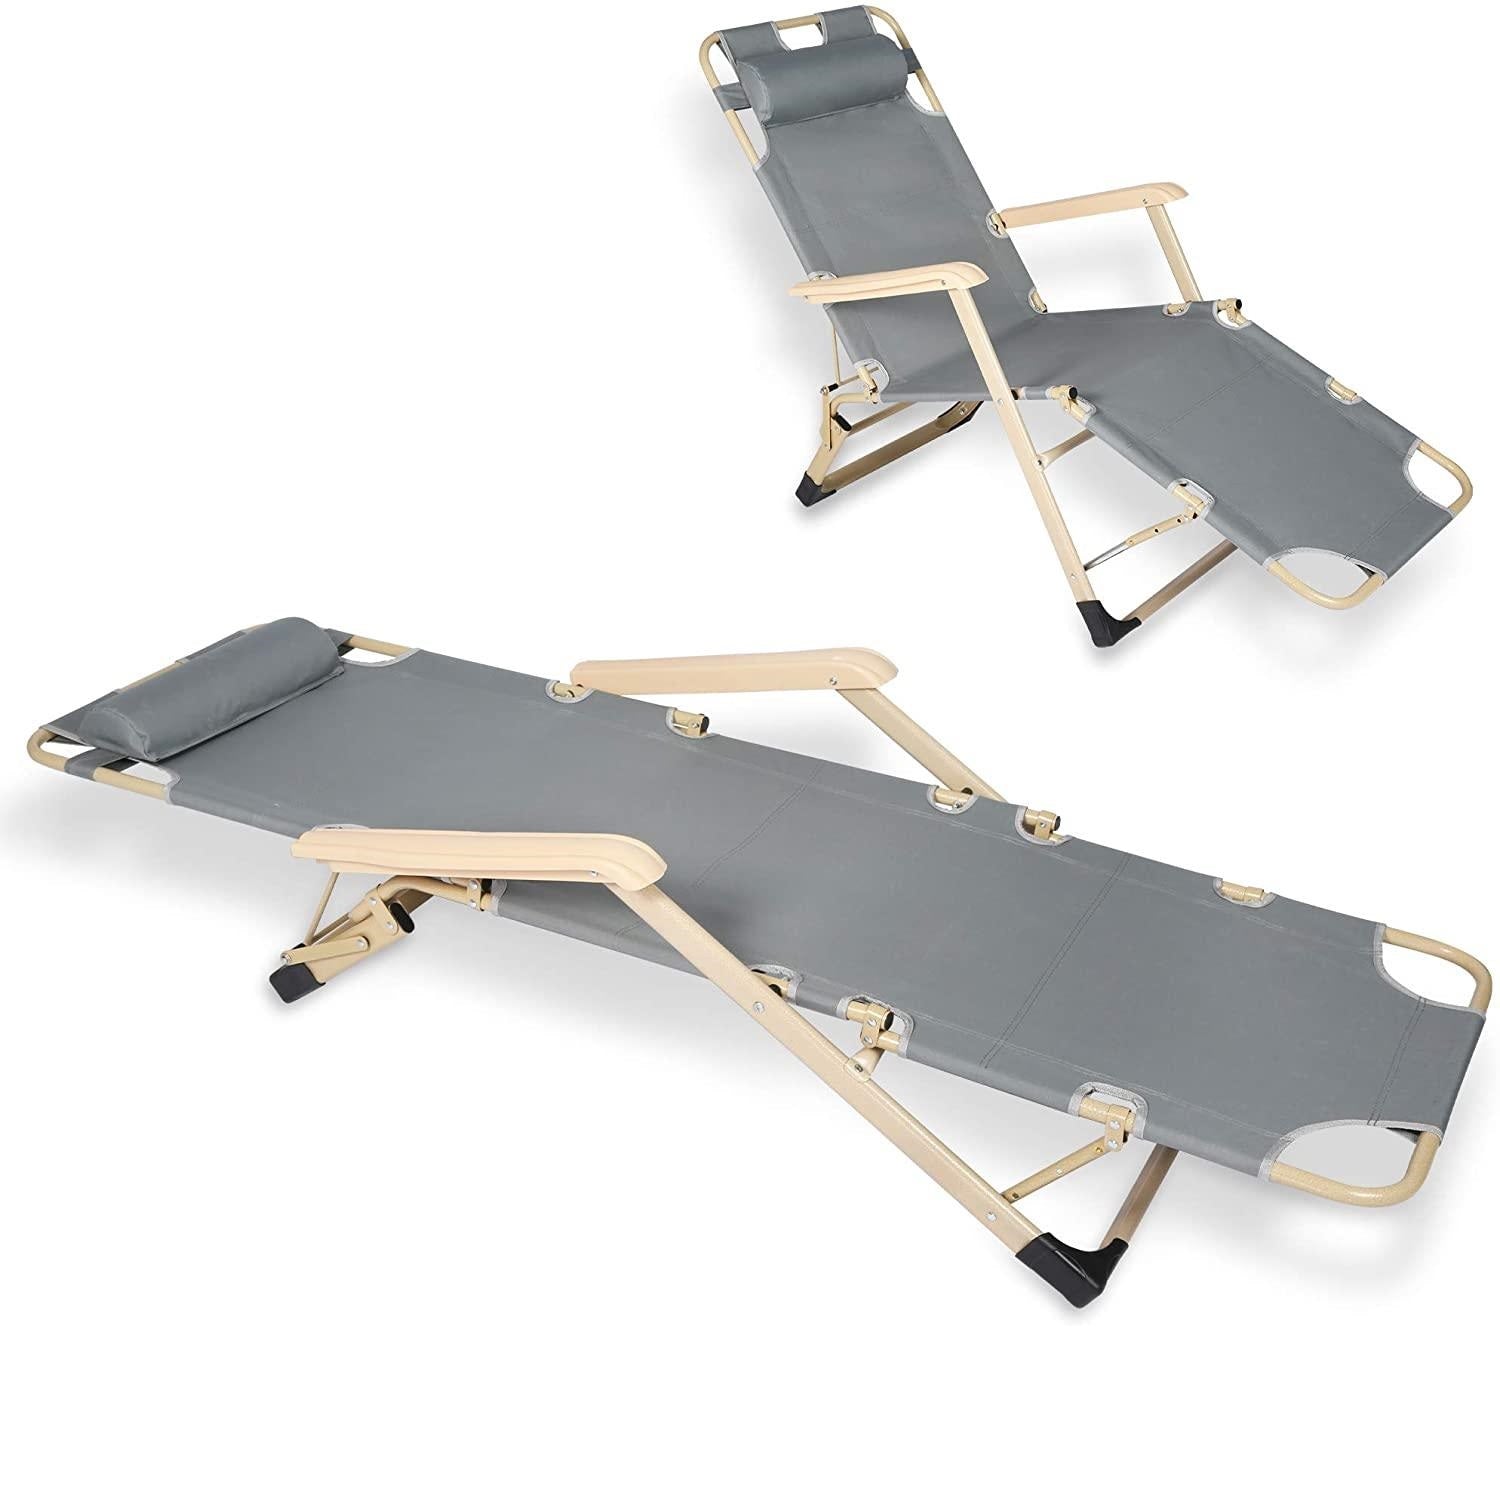 Set of 2 Outdoor Lounge Chairs and Full Flat Cot 2 Positions, Folding Reclining Chairs, Gray